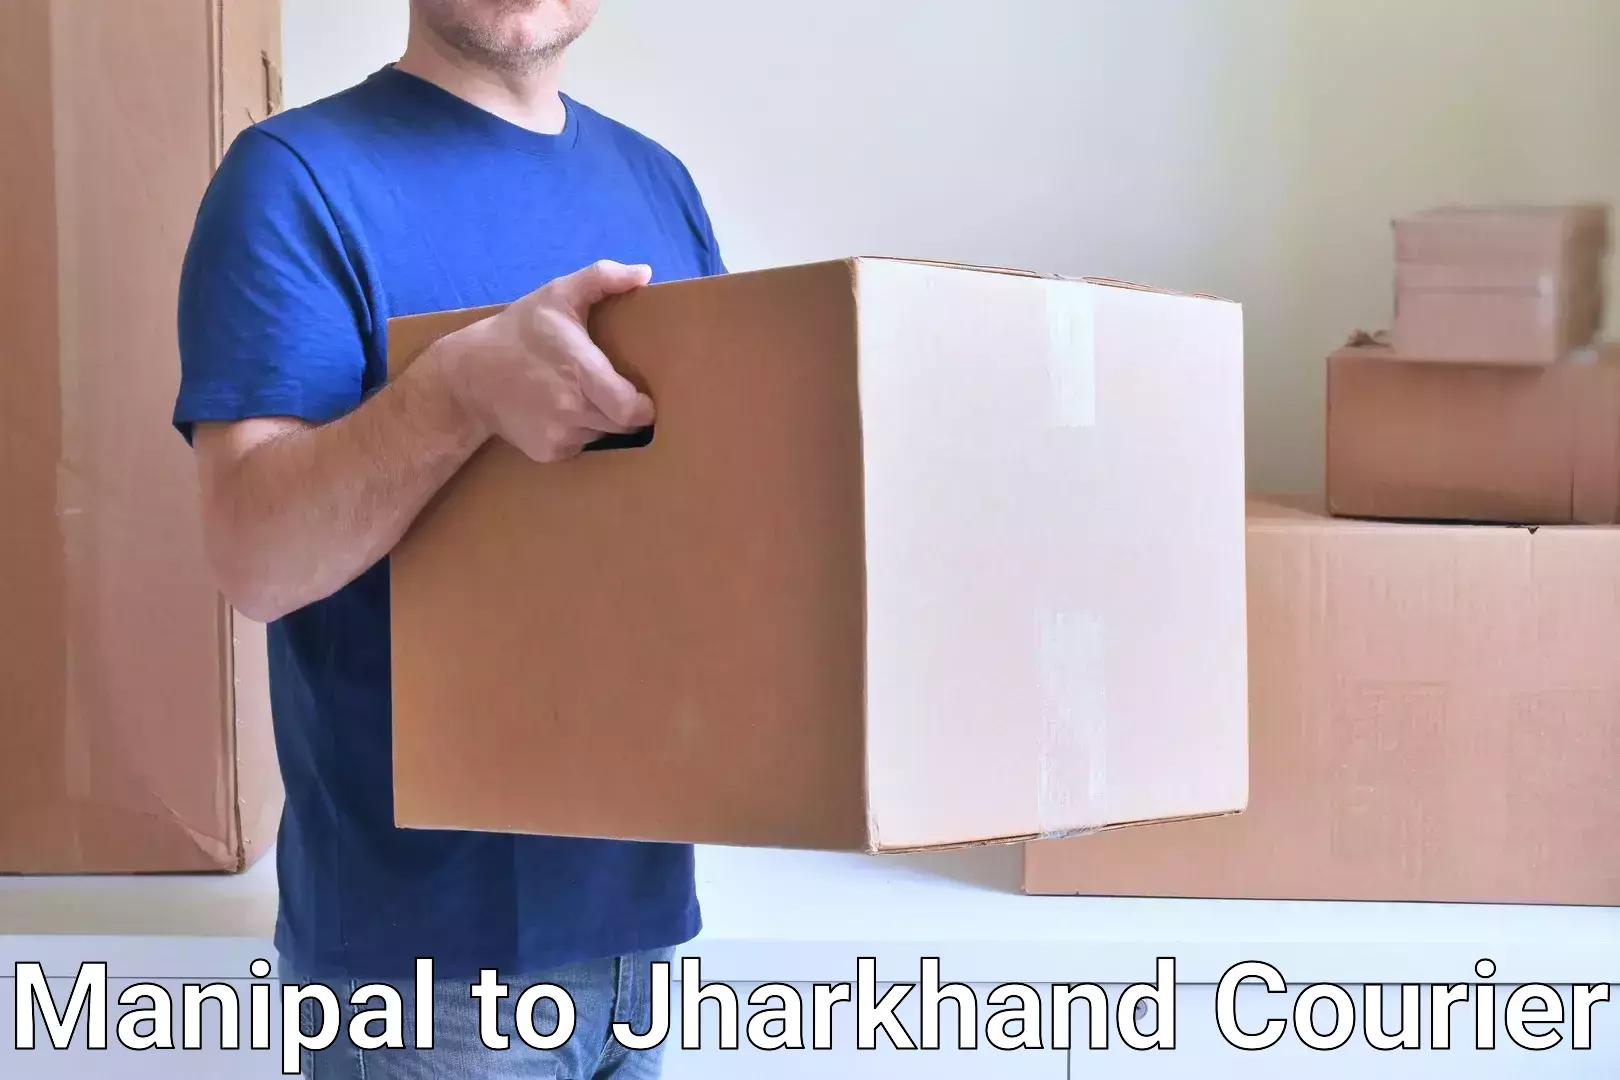 Multi-service courier options Manipal to Barharwa